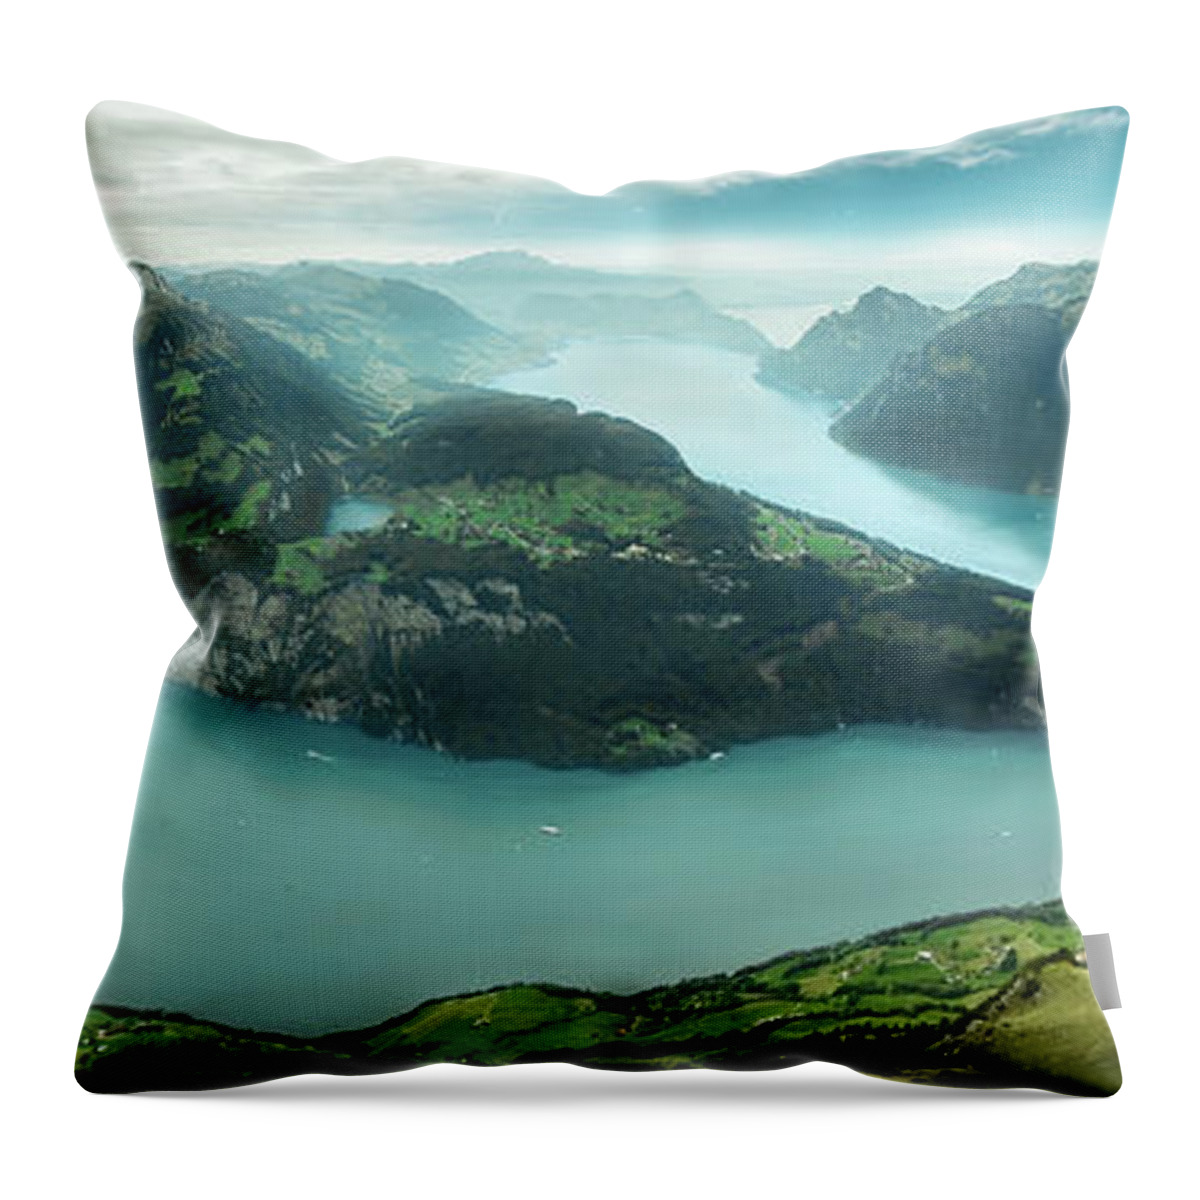 Scenics Throw Pillow featuring the photograph Vierwaldstättersee by Gmsphotography